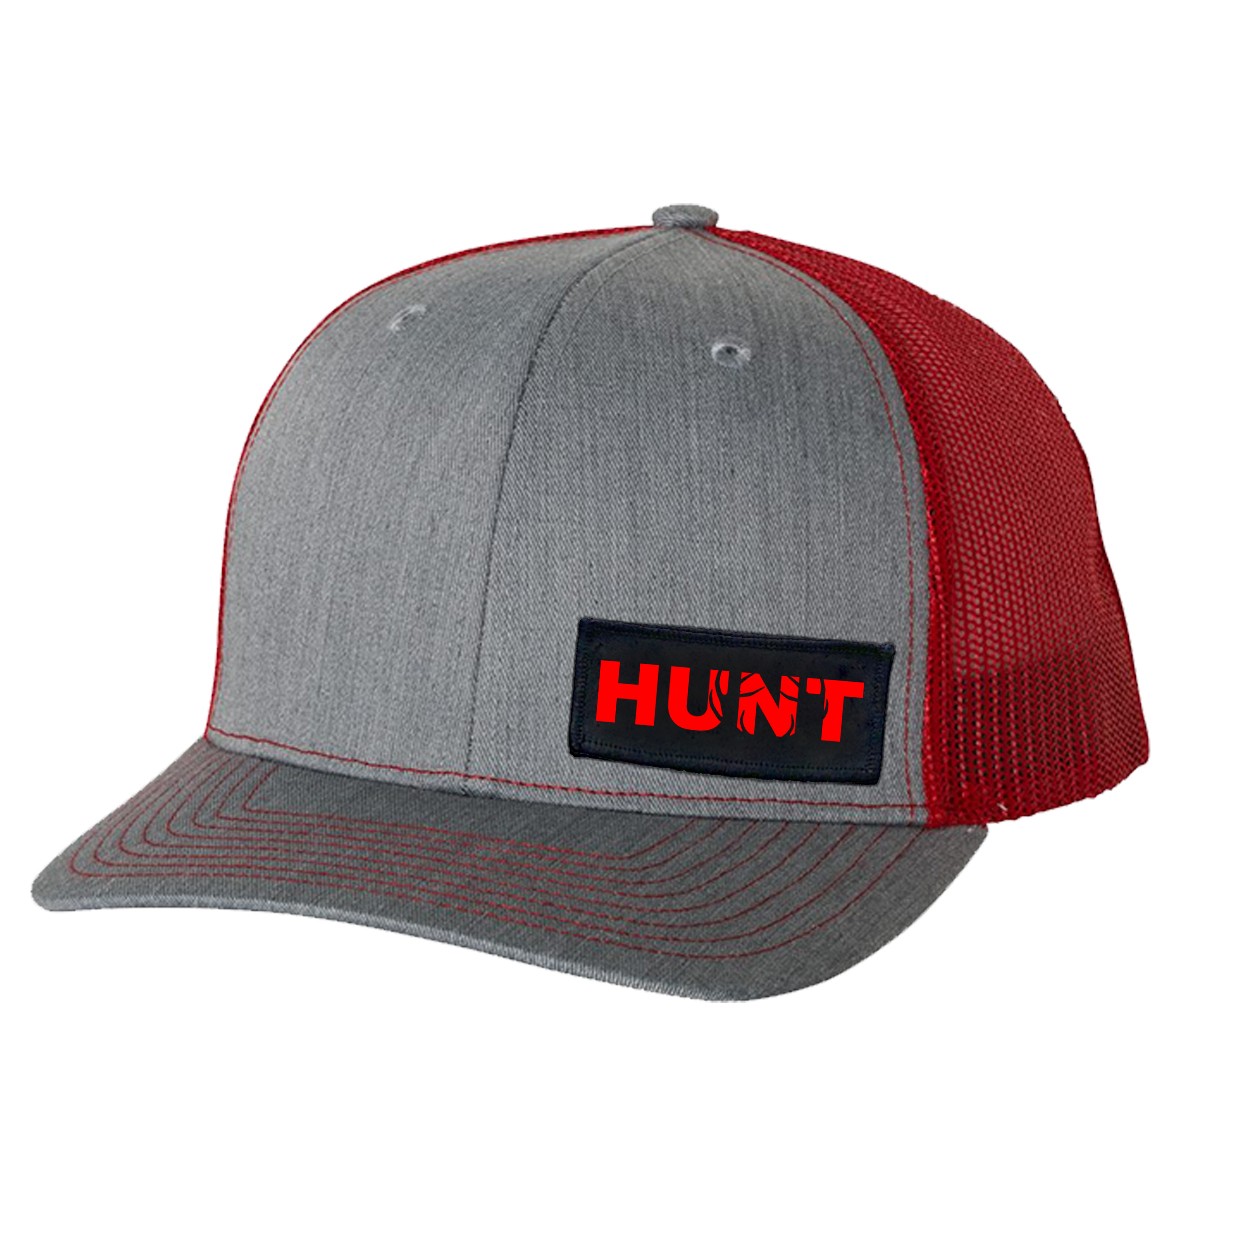 Hunt Rack Logo Night Out Woven Patch Snapback Trucker Hat Heather Heather Grey/Red (Red Logo)